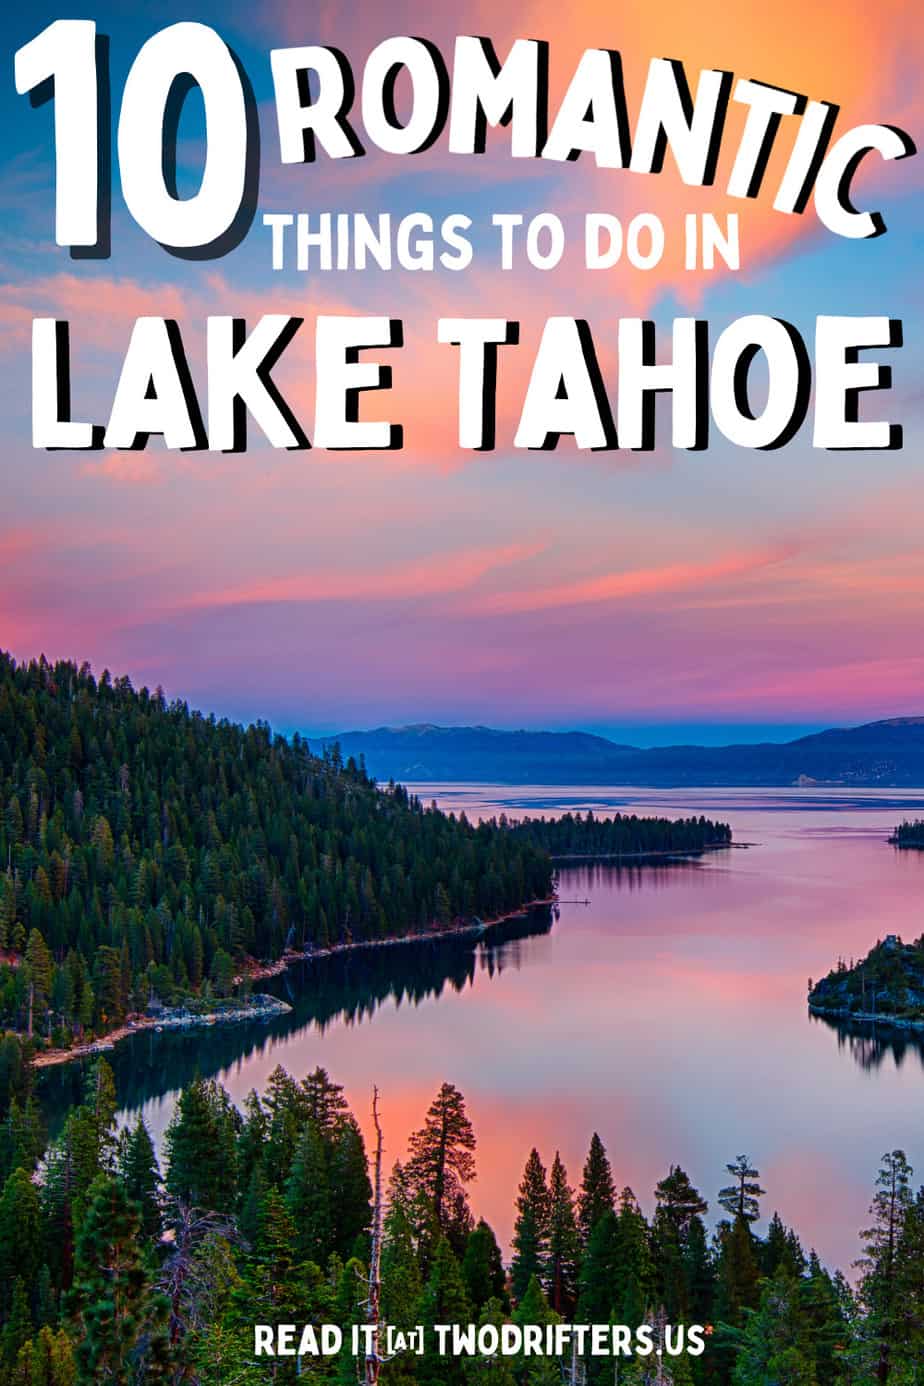 Pinterest social image that says “10 romantic things to do in Lake Tahoe.”